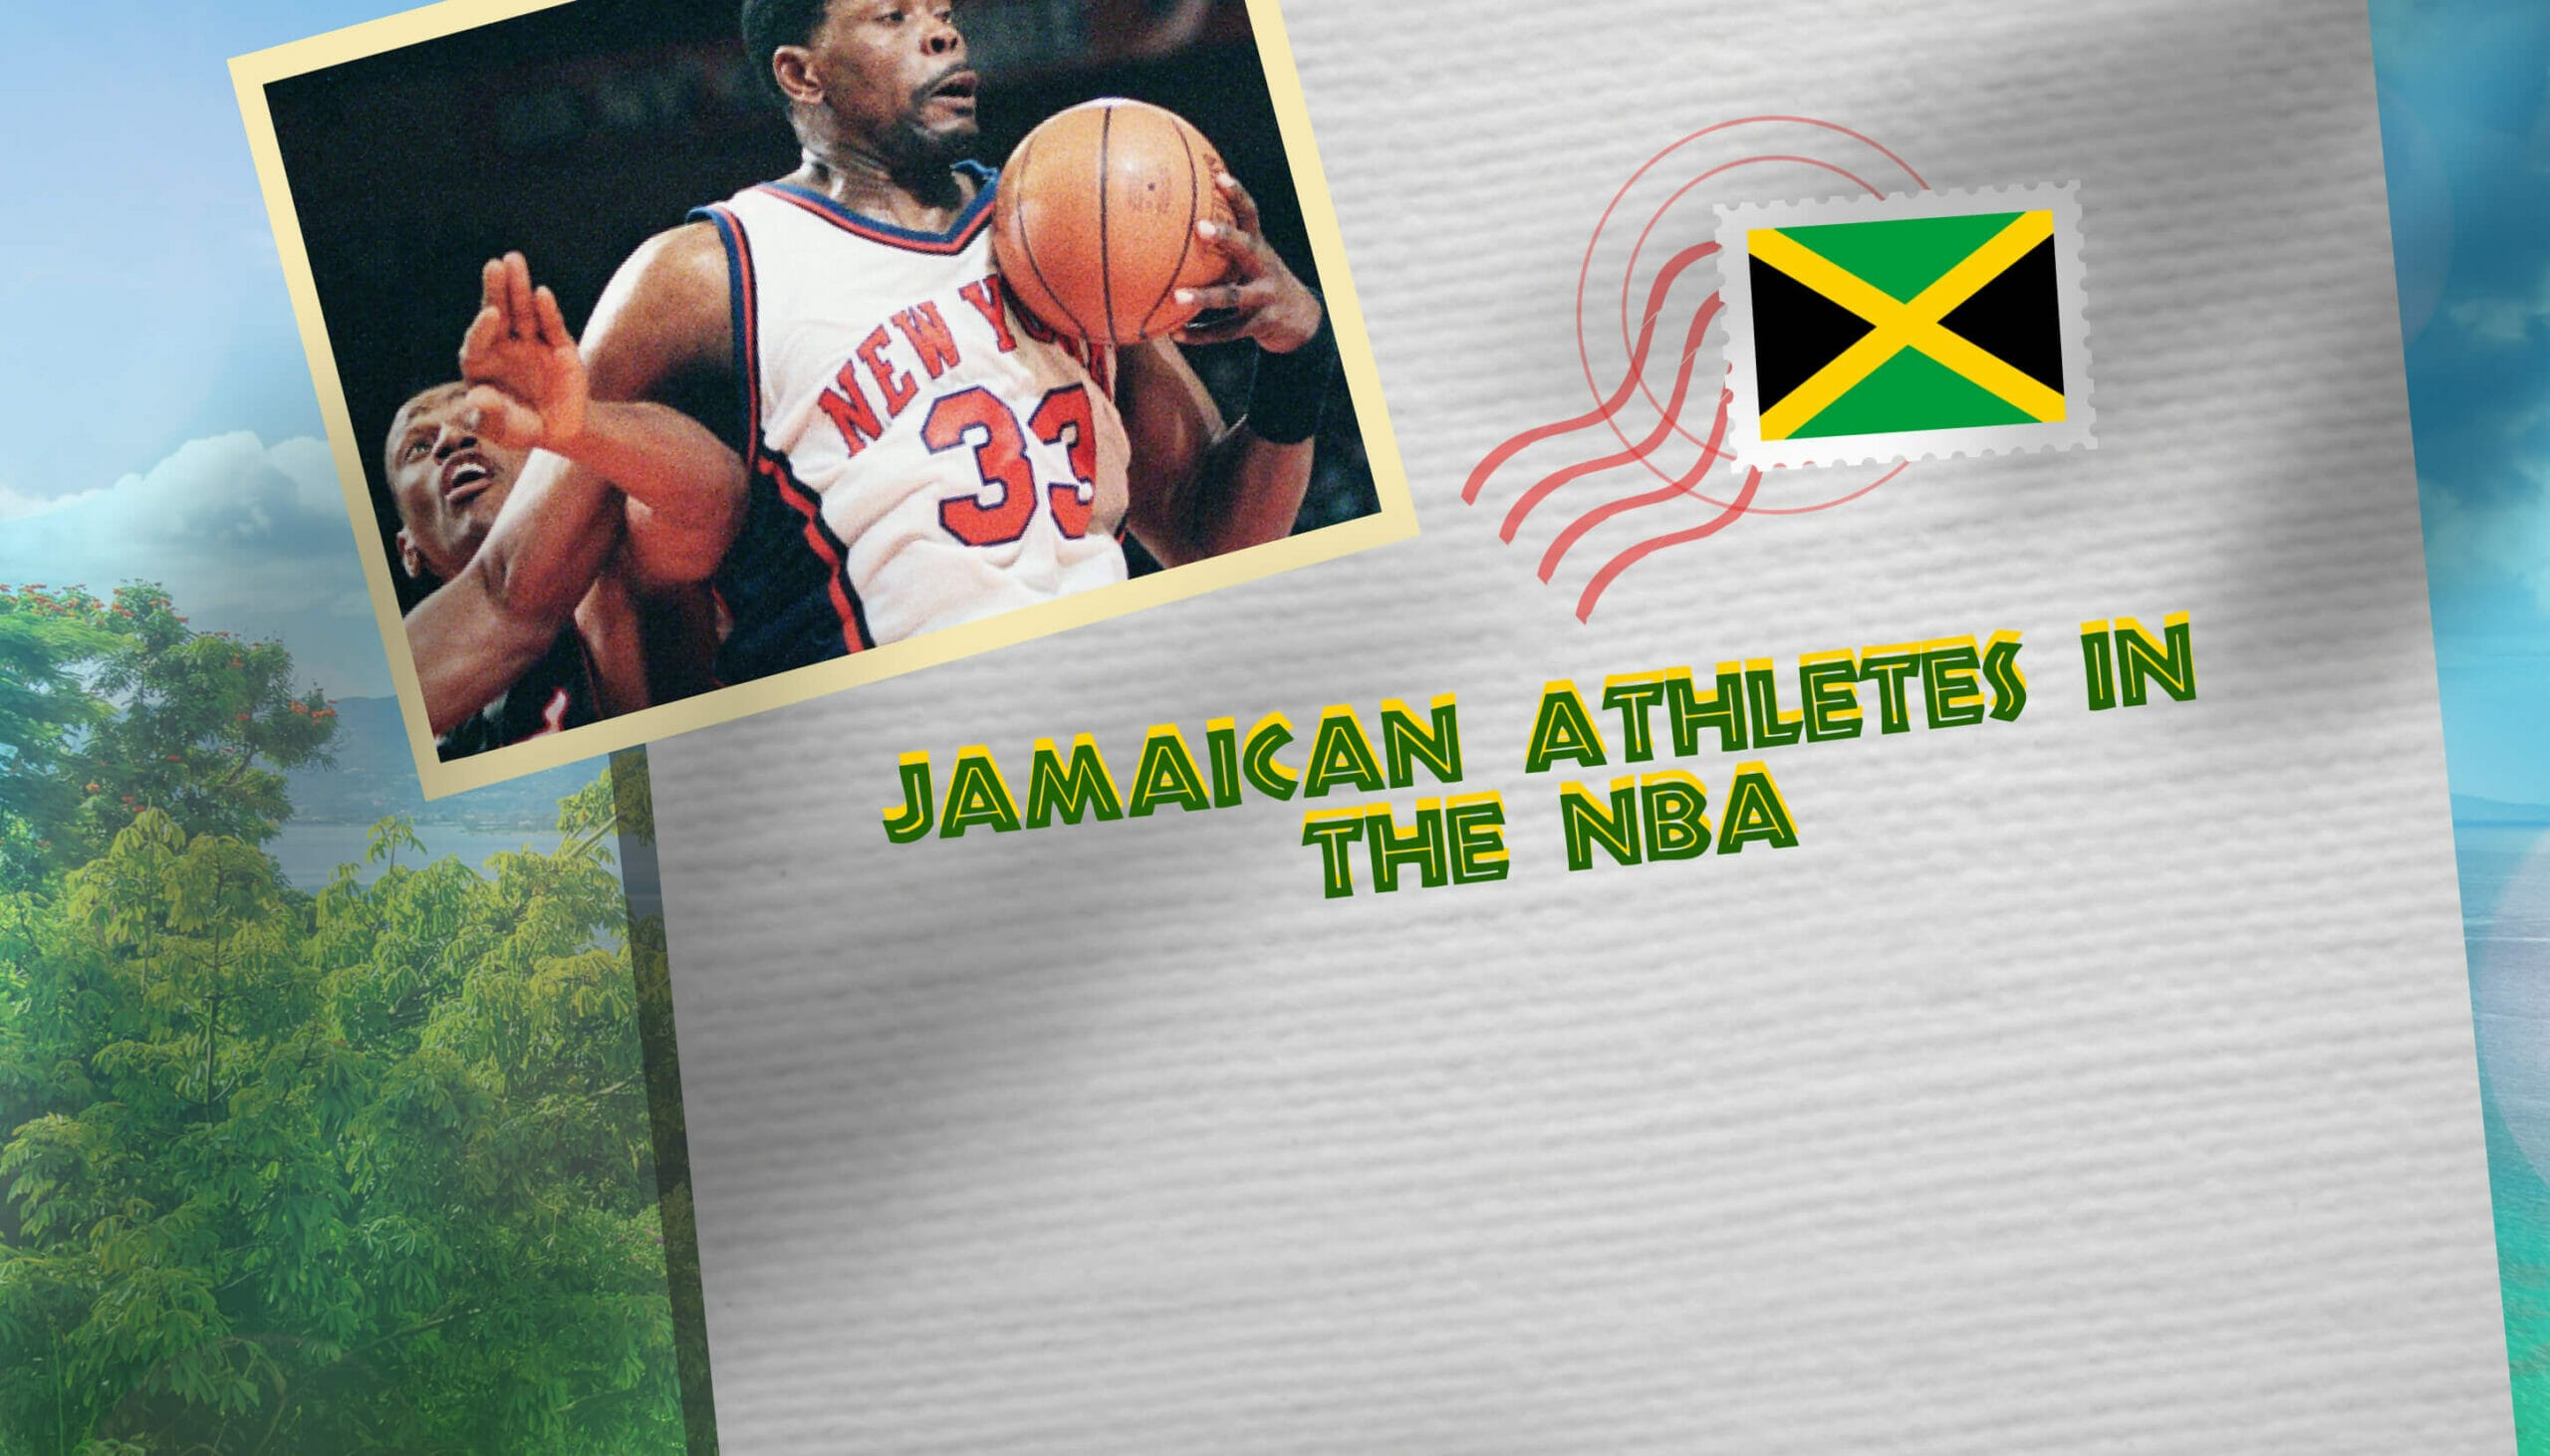 Jamaican Athletes in the NBA